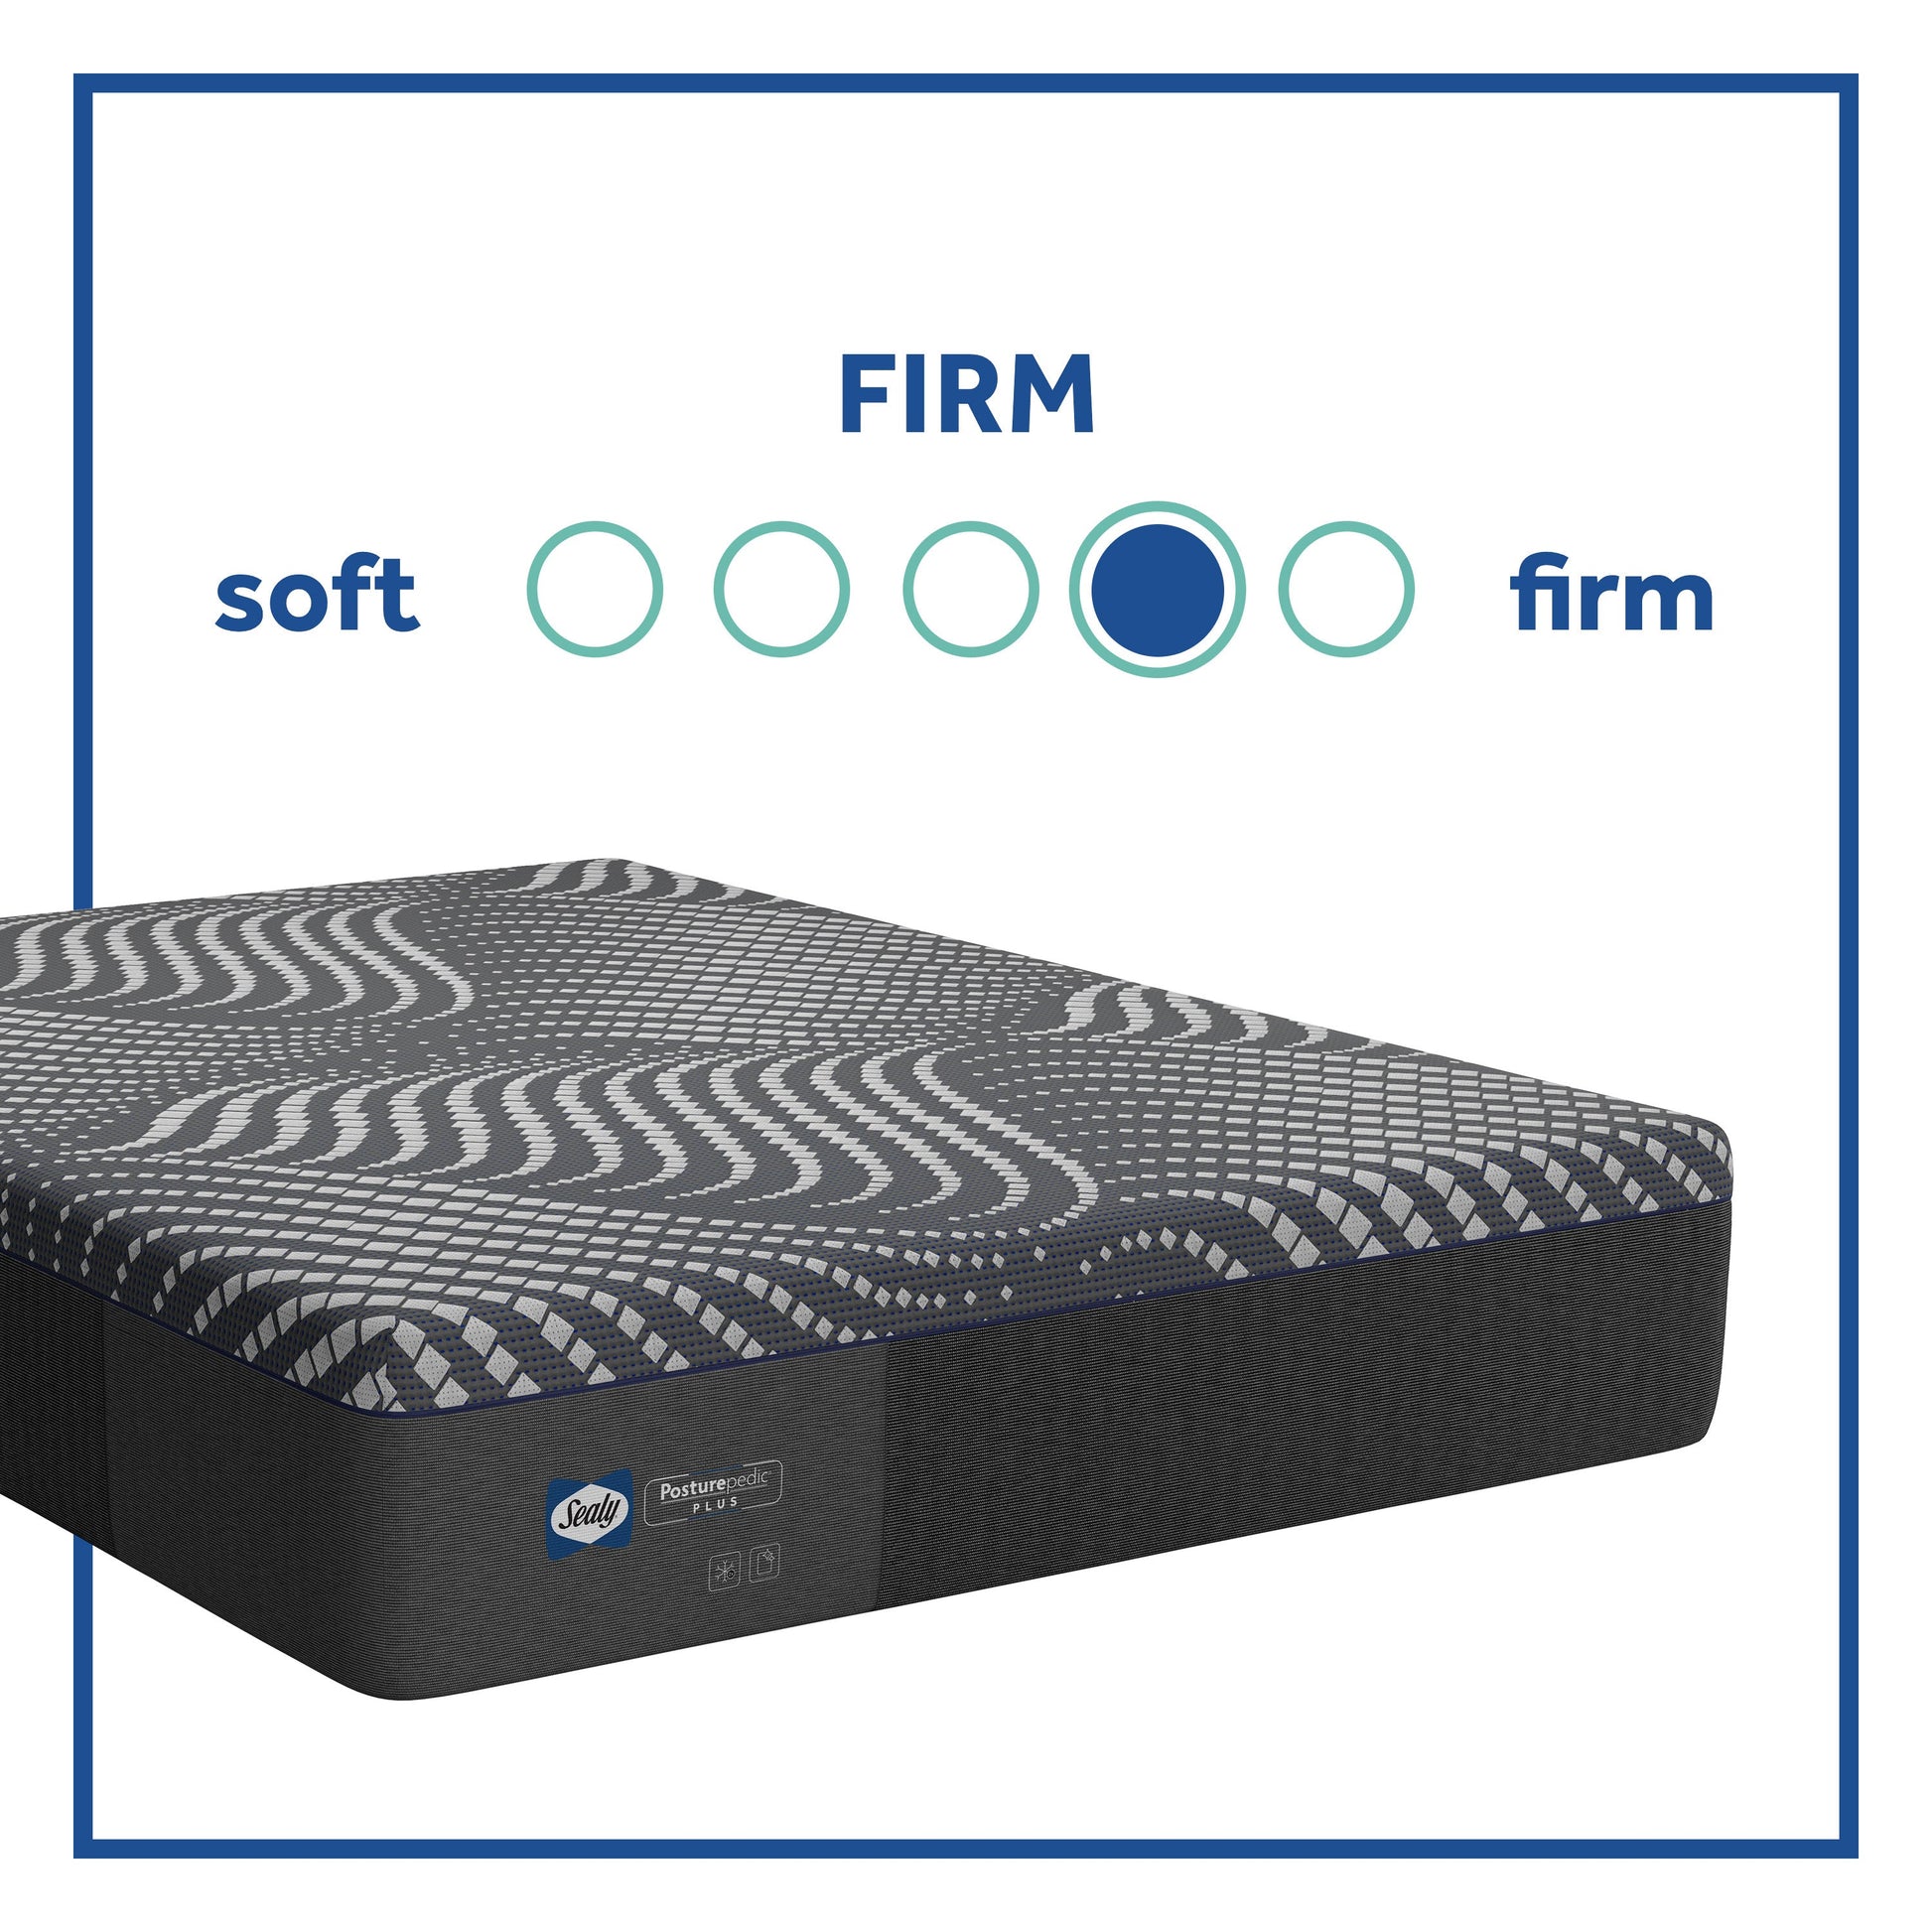 Sealy Albany Firm Mattress Firmness Guide